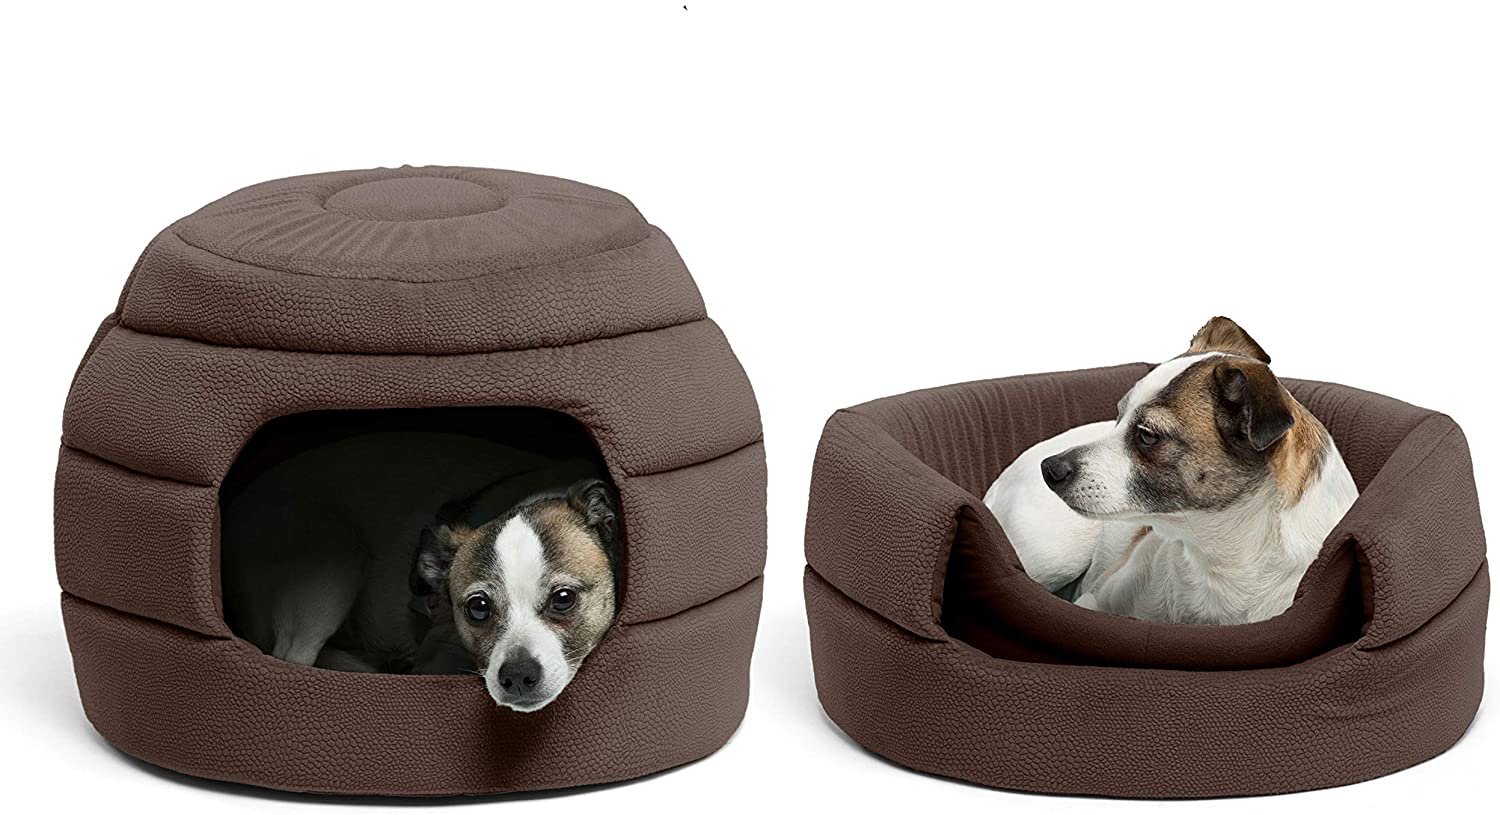 Best Friends by Sheri Convertible Honeycomb Cave Bed